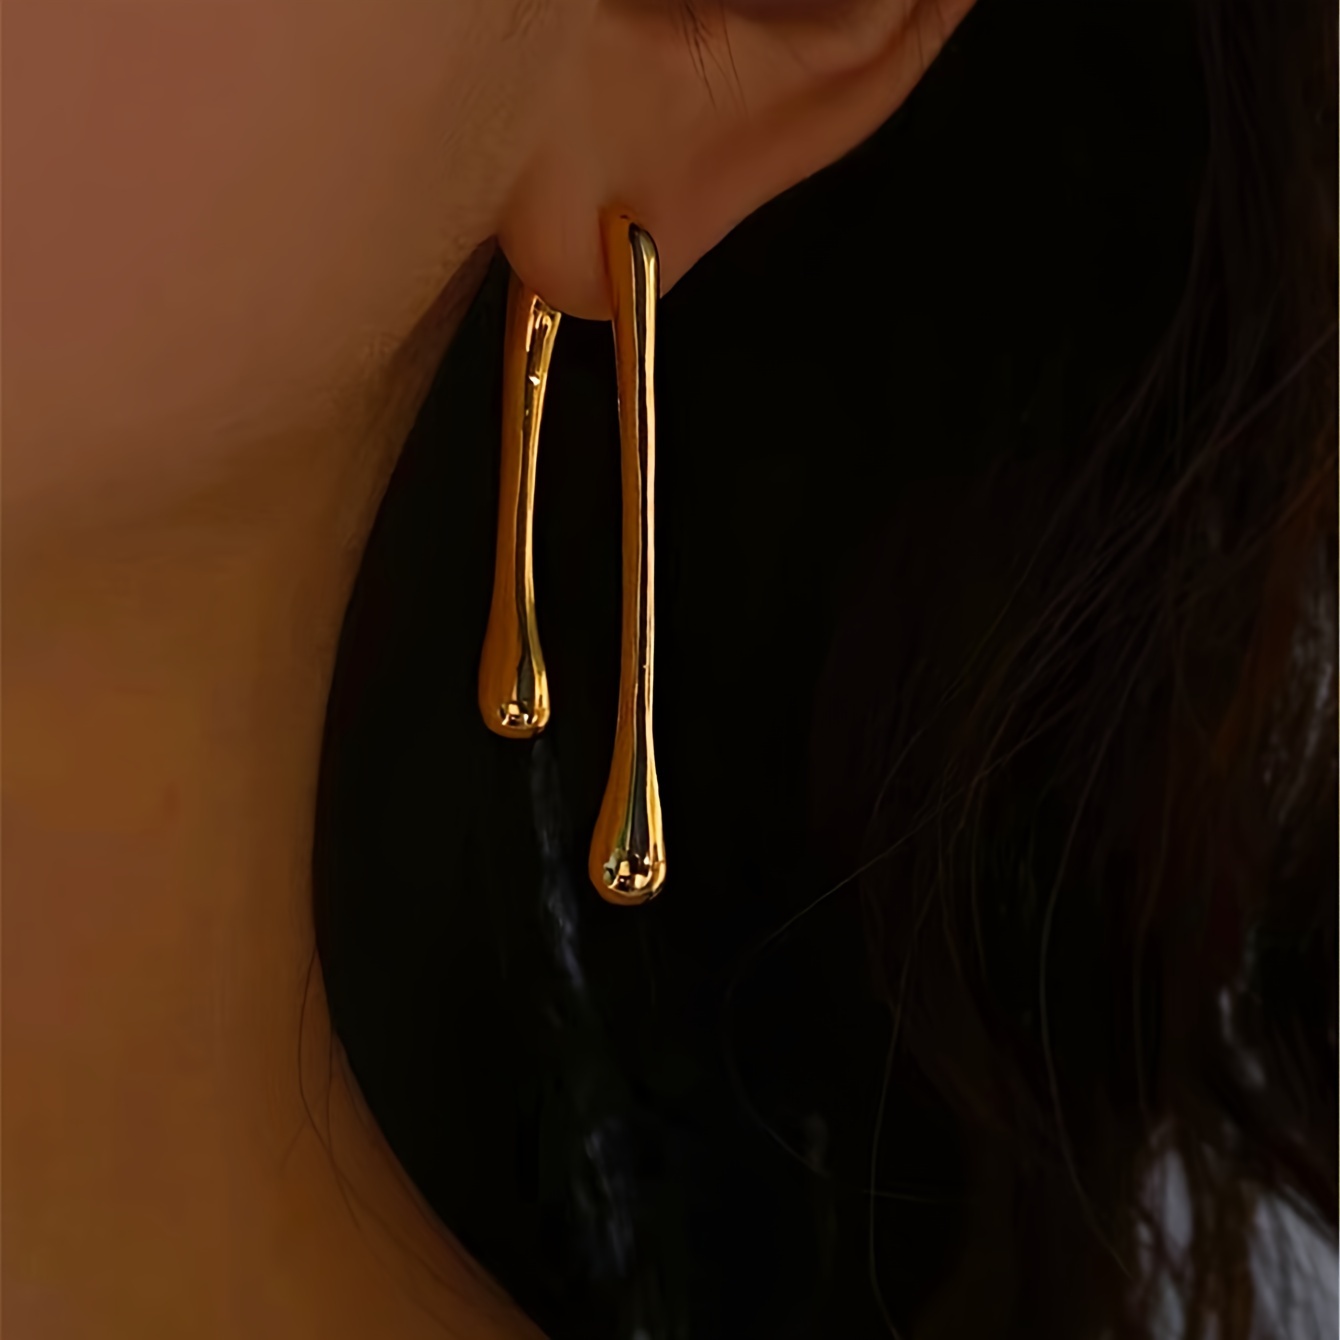 

1 Pair Of Dangle Earrings 14k Gold Plated Irregular Drop Design Match Daily Outfits Party Accessories Perfect Decor For Cool Friends